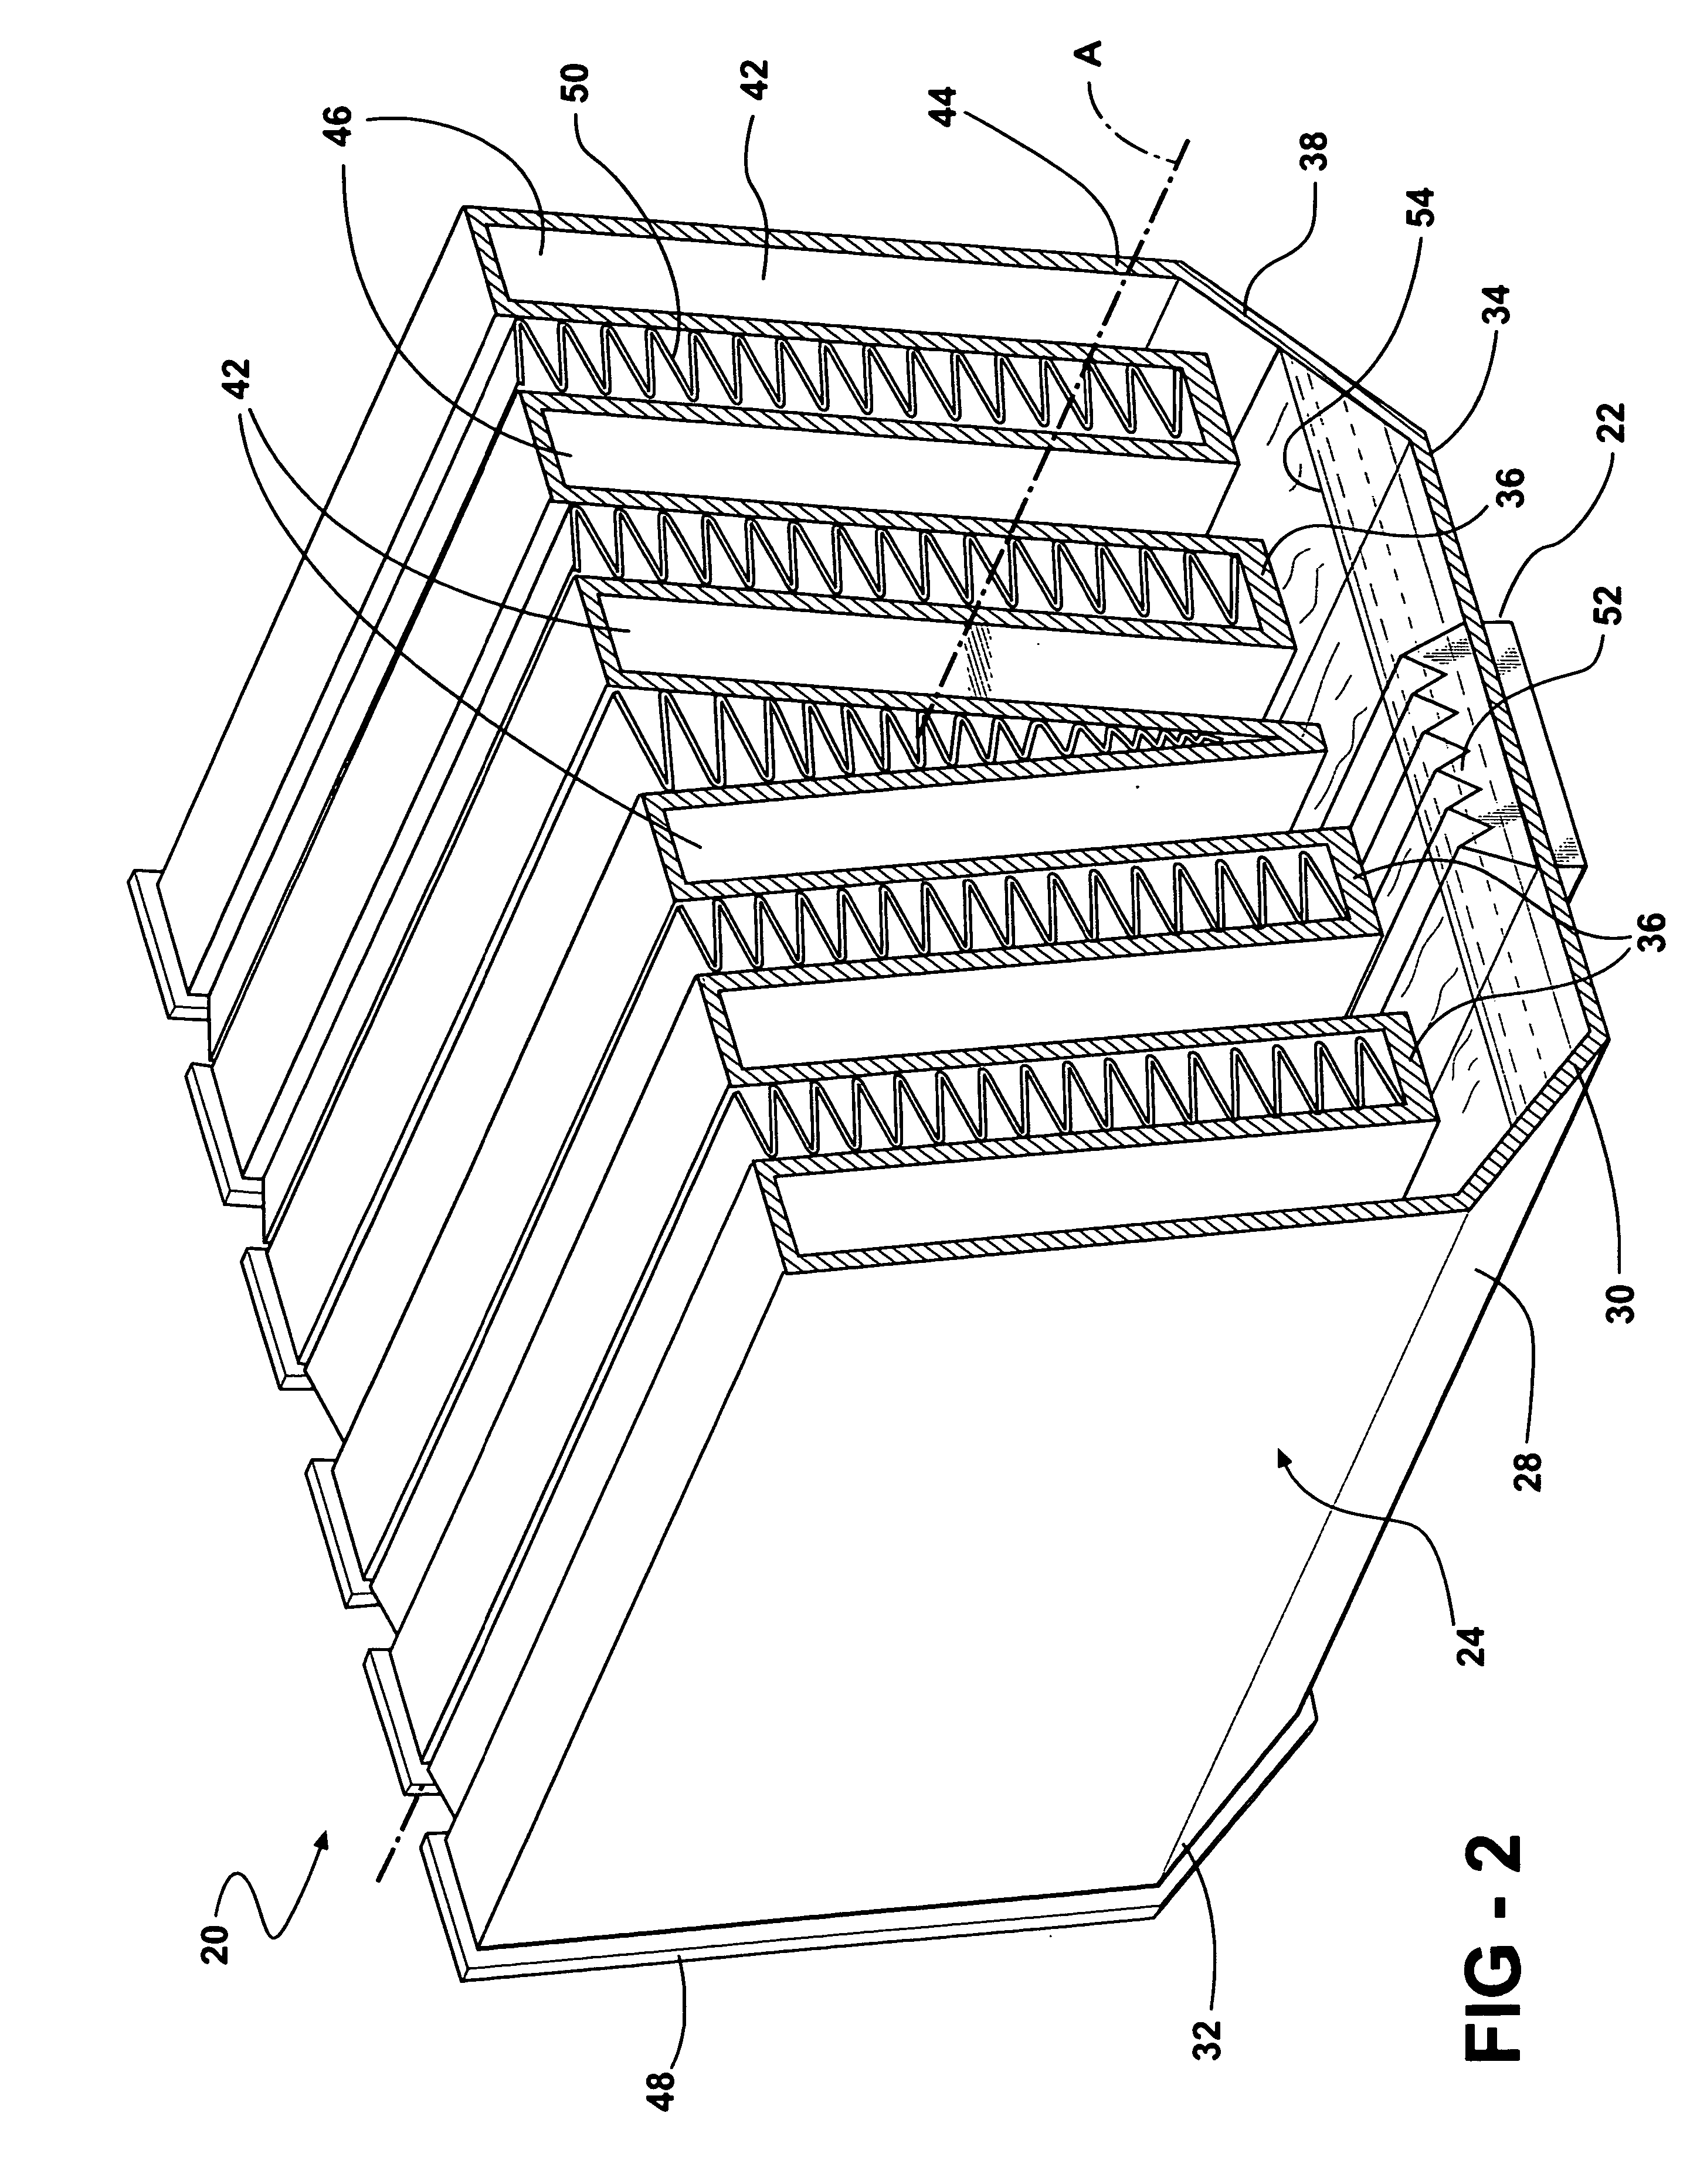 Orientation insensitive thermosiphon of v-configuration